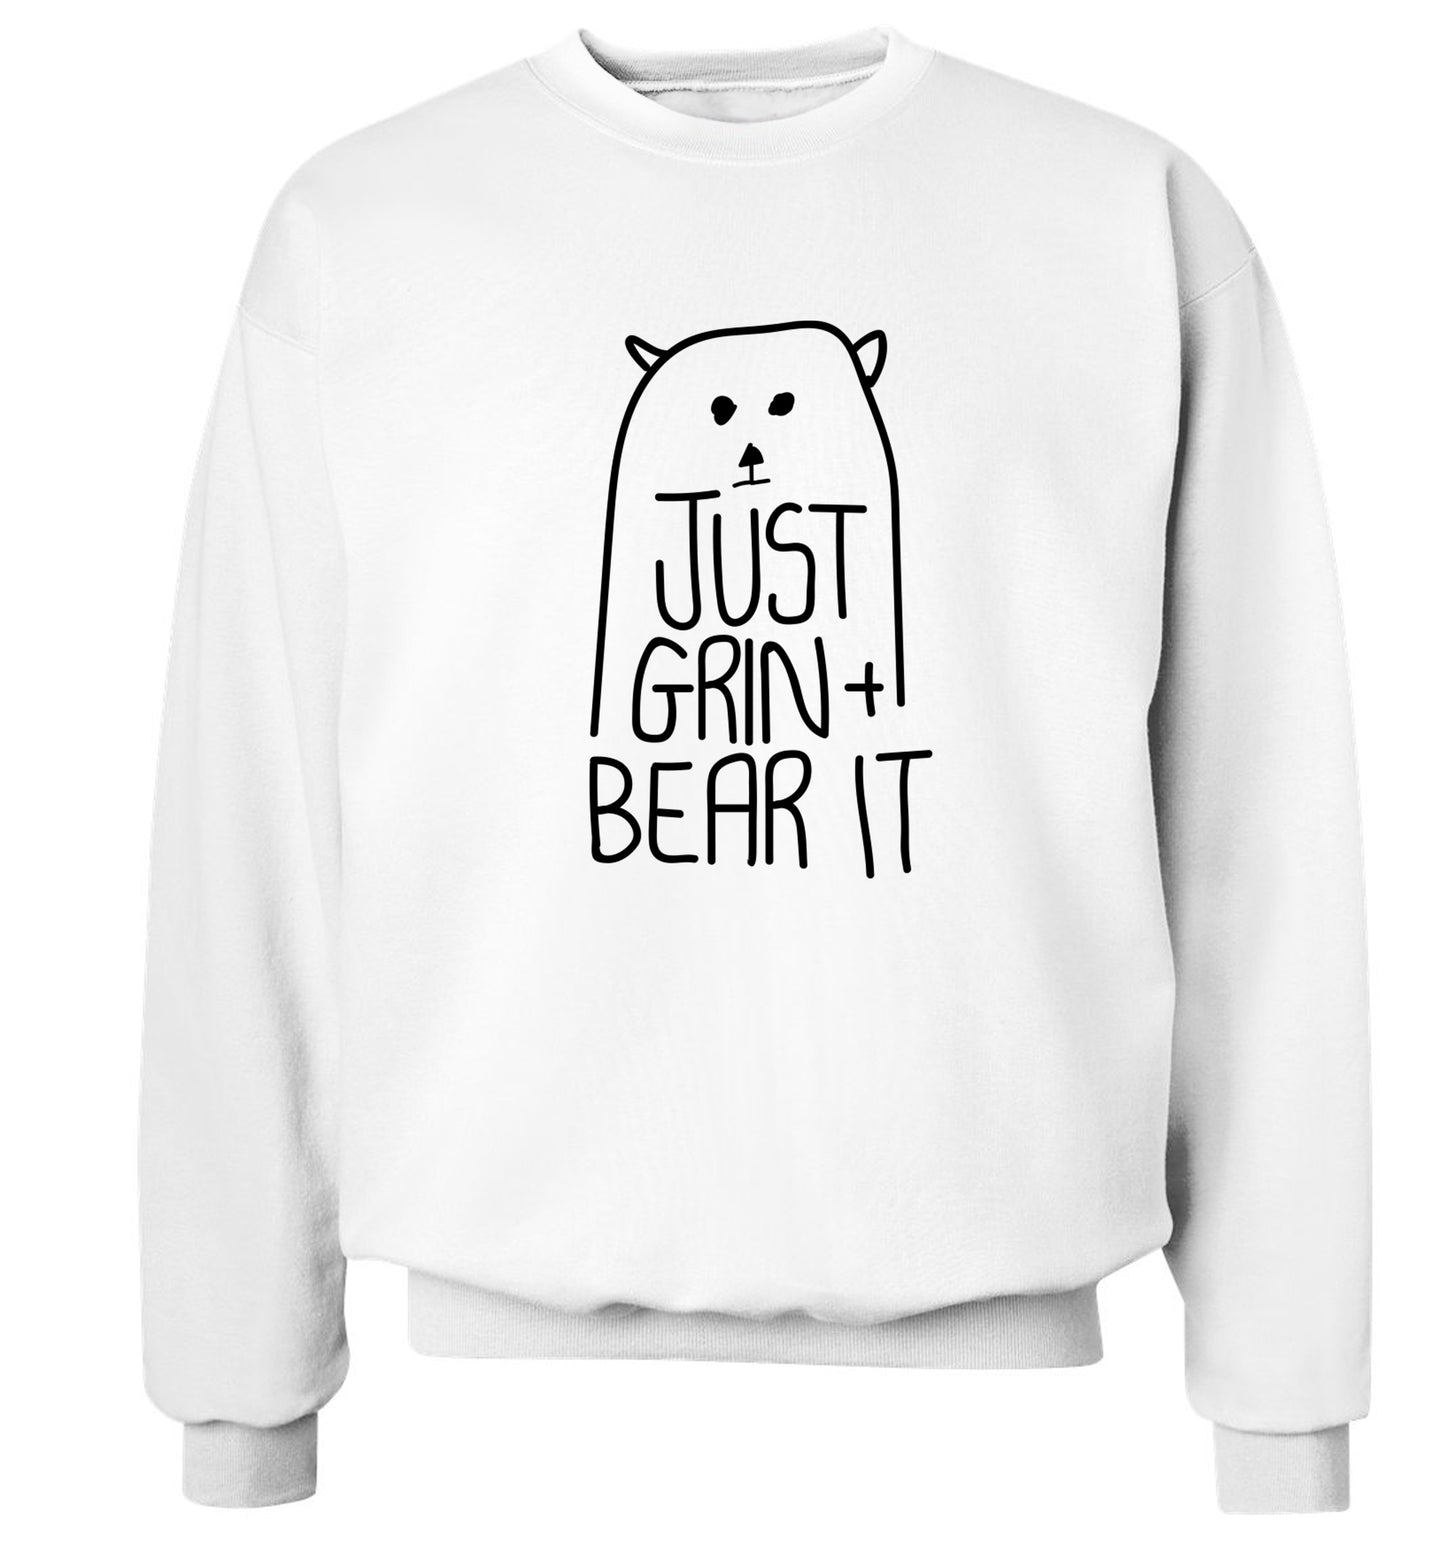 Just grin and bear it Adult's unisex white Sweater 2XL